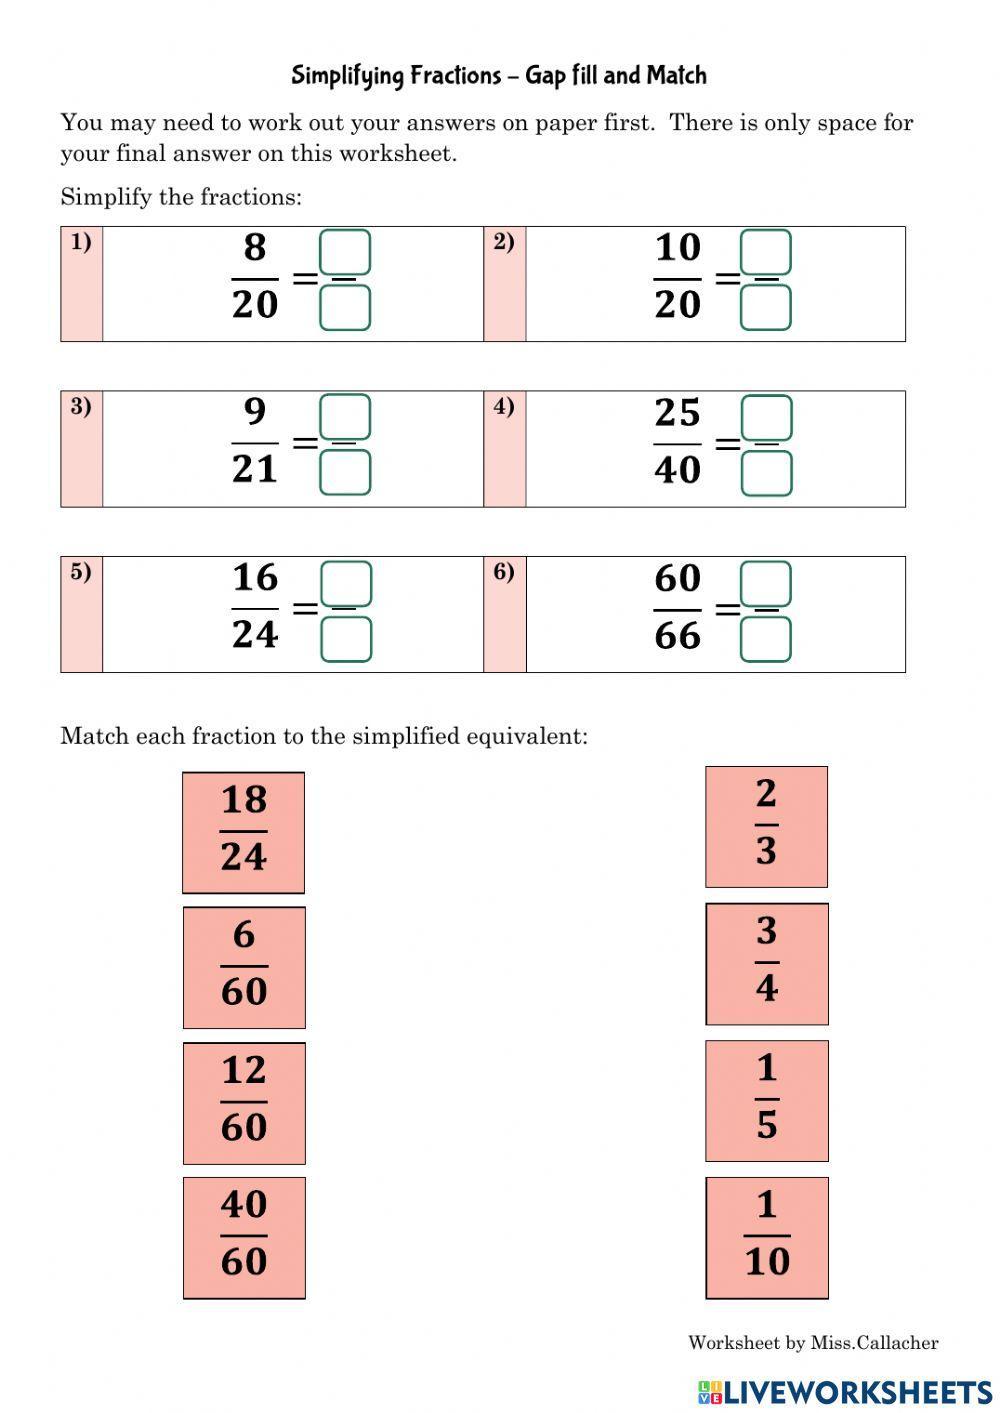 Simplifying Fractions Gap Fill and Match